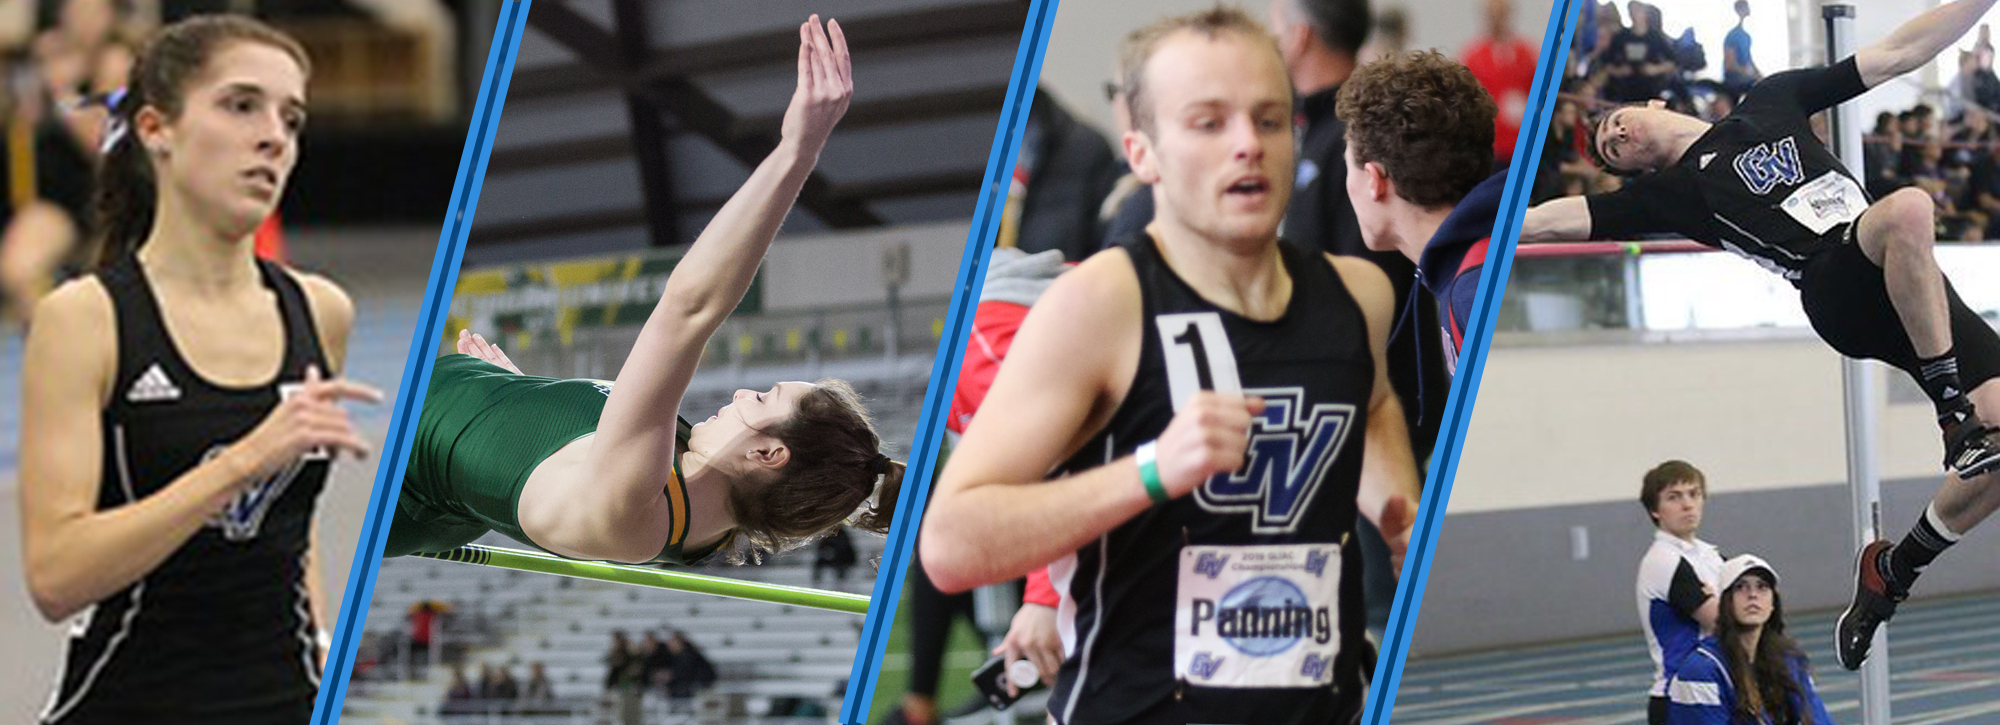 GVSU's Panning, Ludge and Weeks, and NMU's Juergen take Outdoor T&F week 2 awards